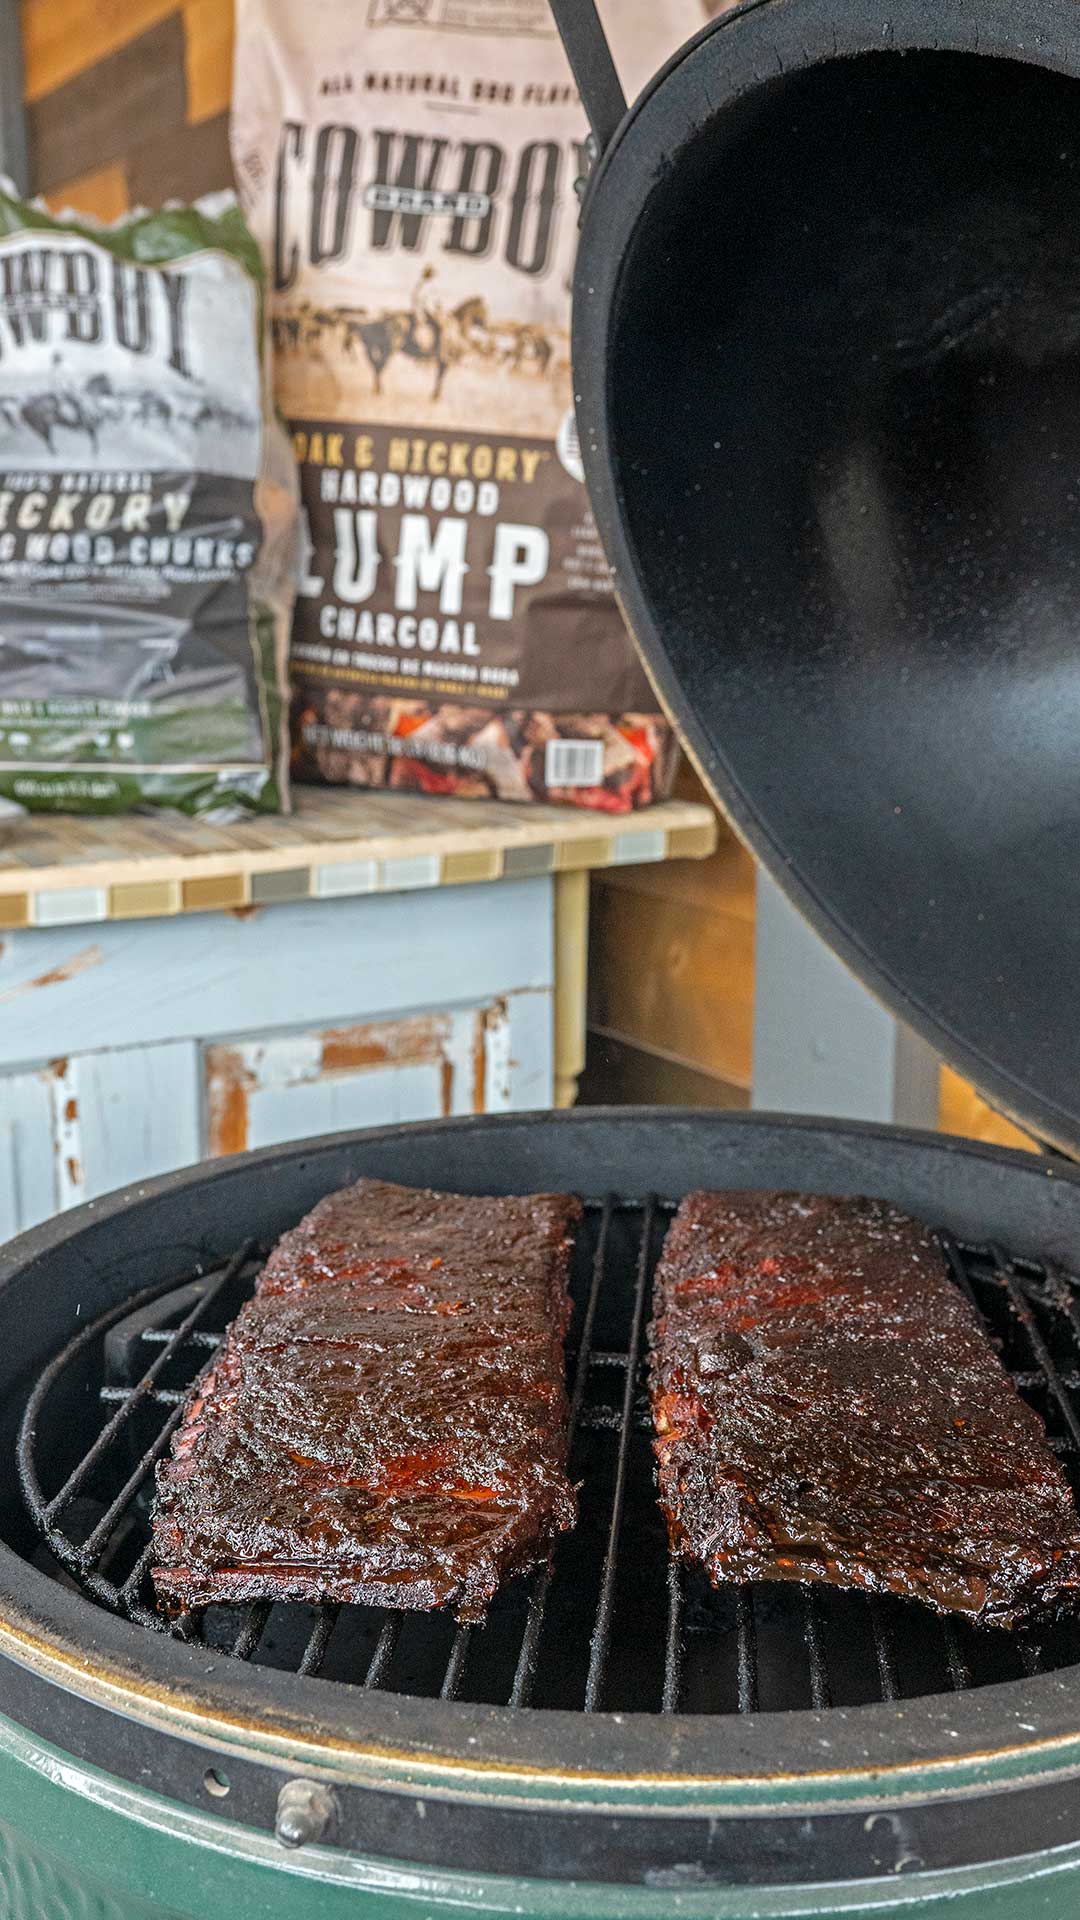 two racks of ribs on grill by bag of Cowboy lump charcoal and wood chunks